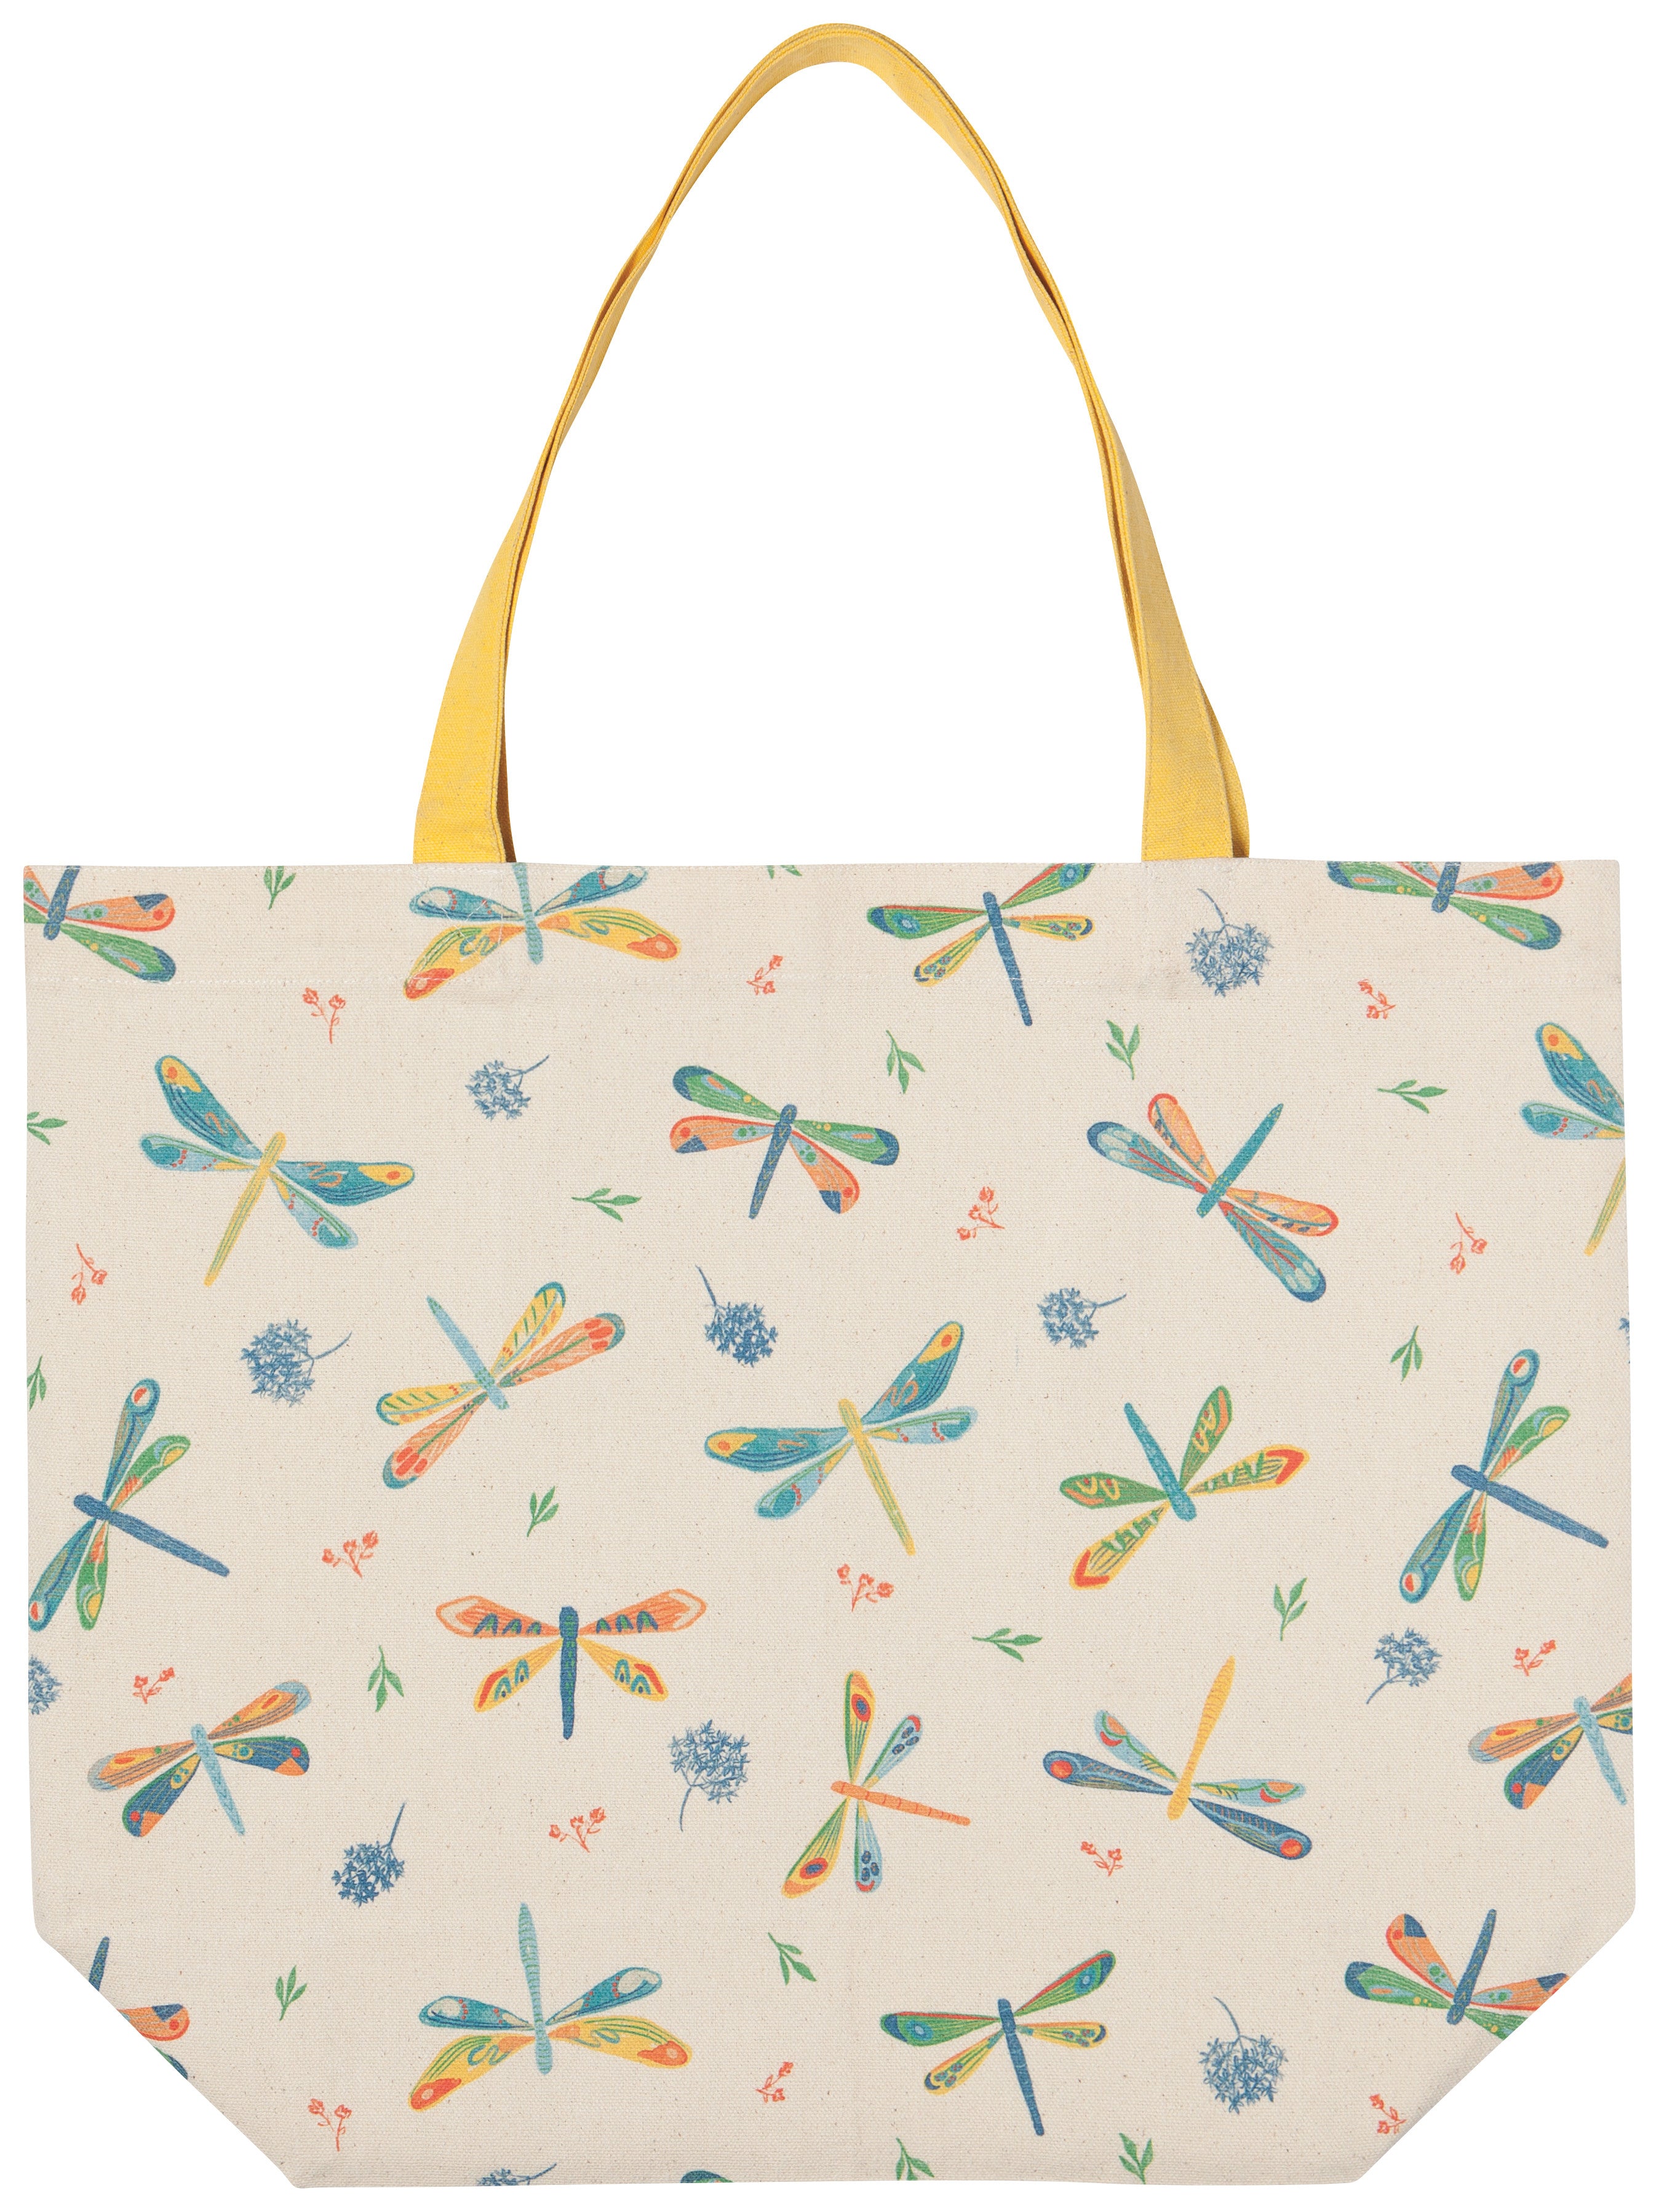 Dragonfly Tote Bag | Now Designs - Oscar & Libby's